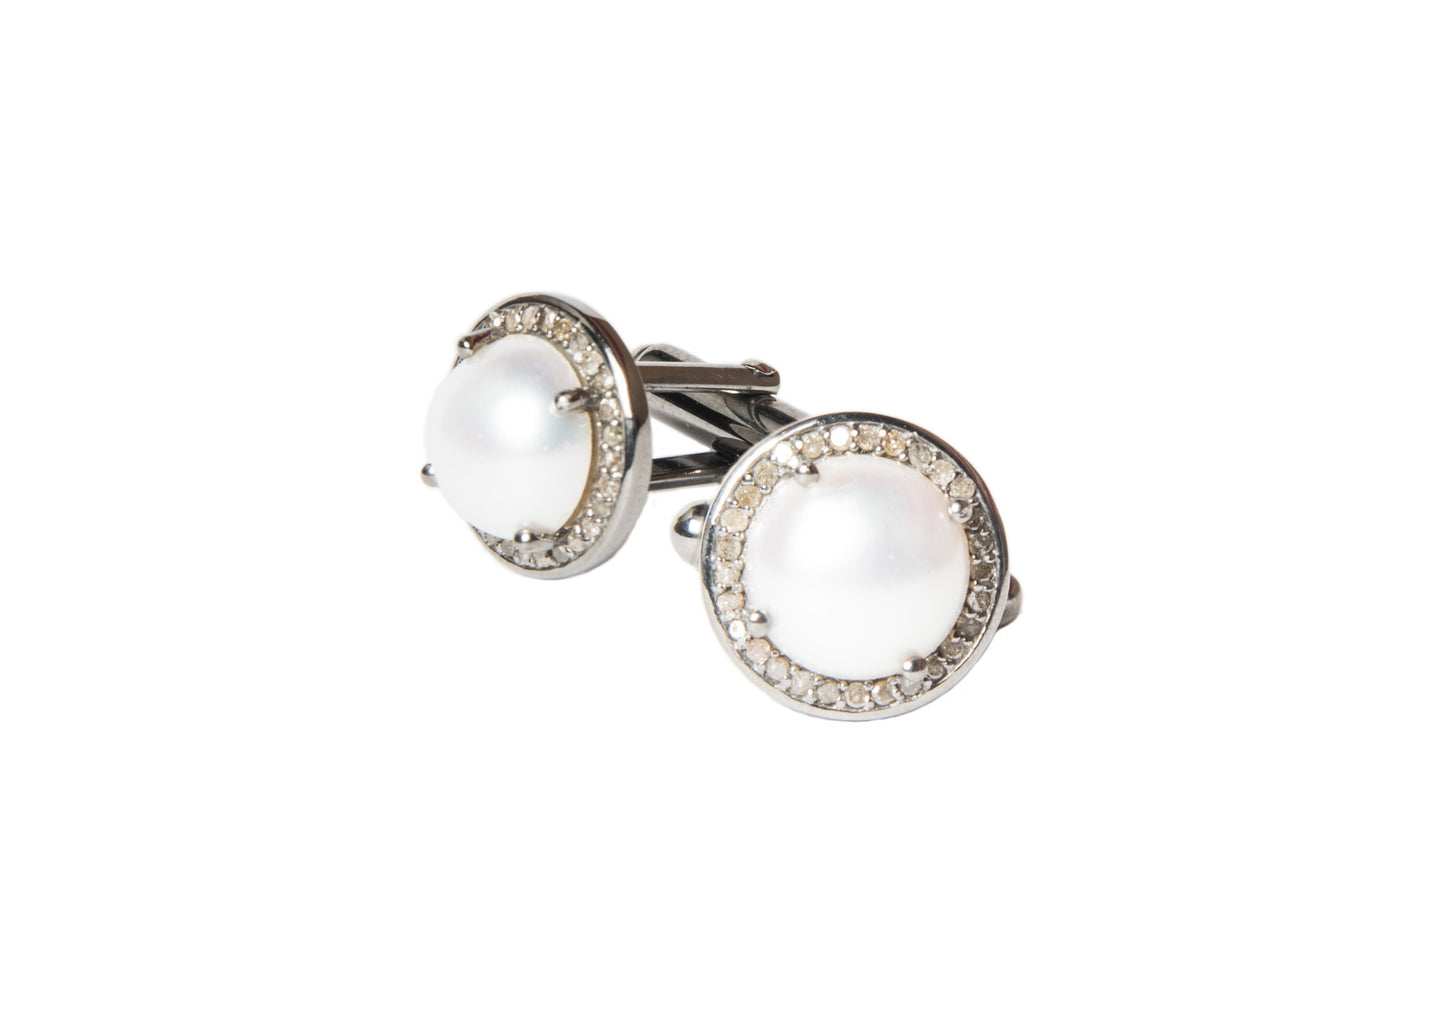 Weekender Cuff Links - Hottest Designer Pearl and Leather Jewelry | VINCENT PEACH
